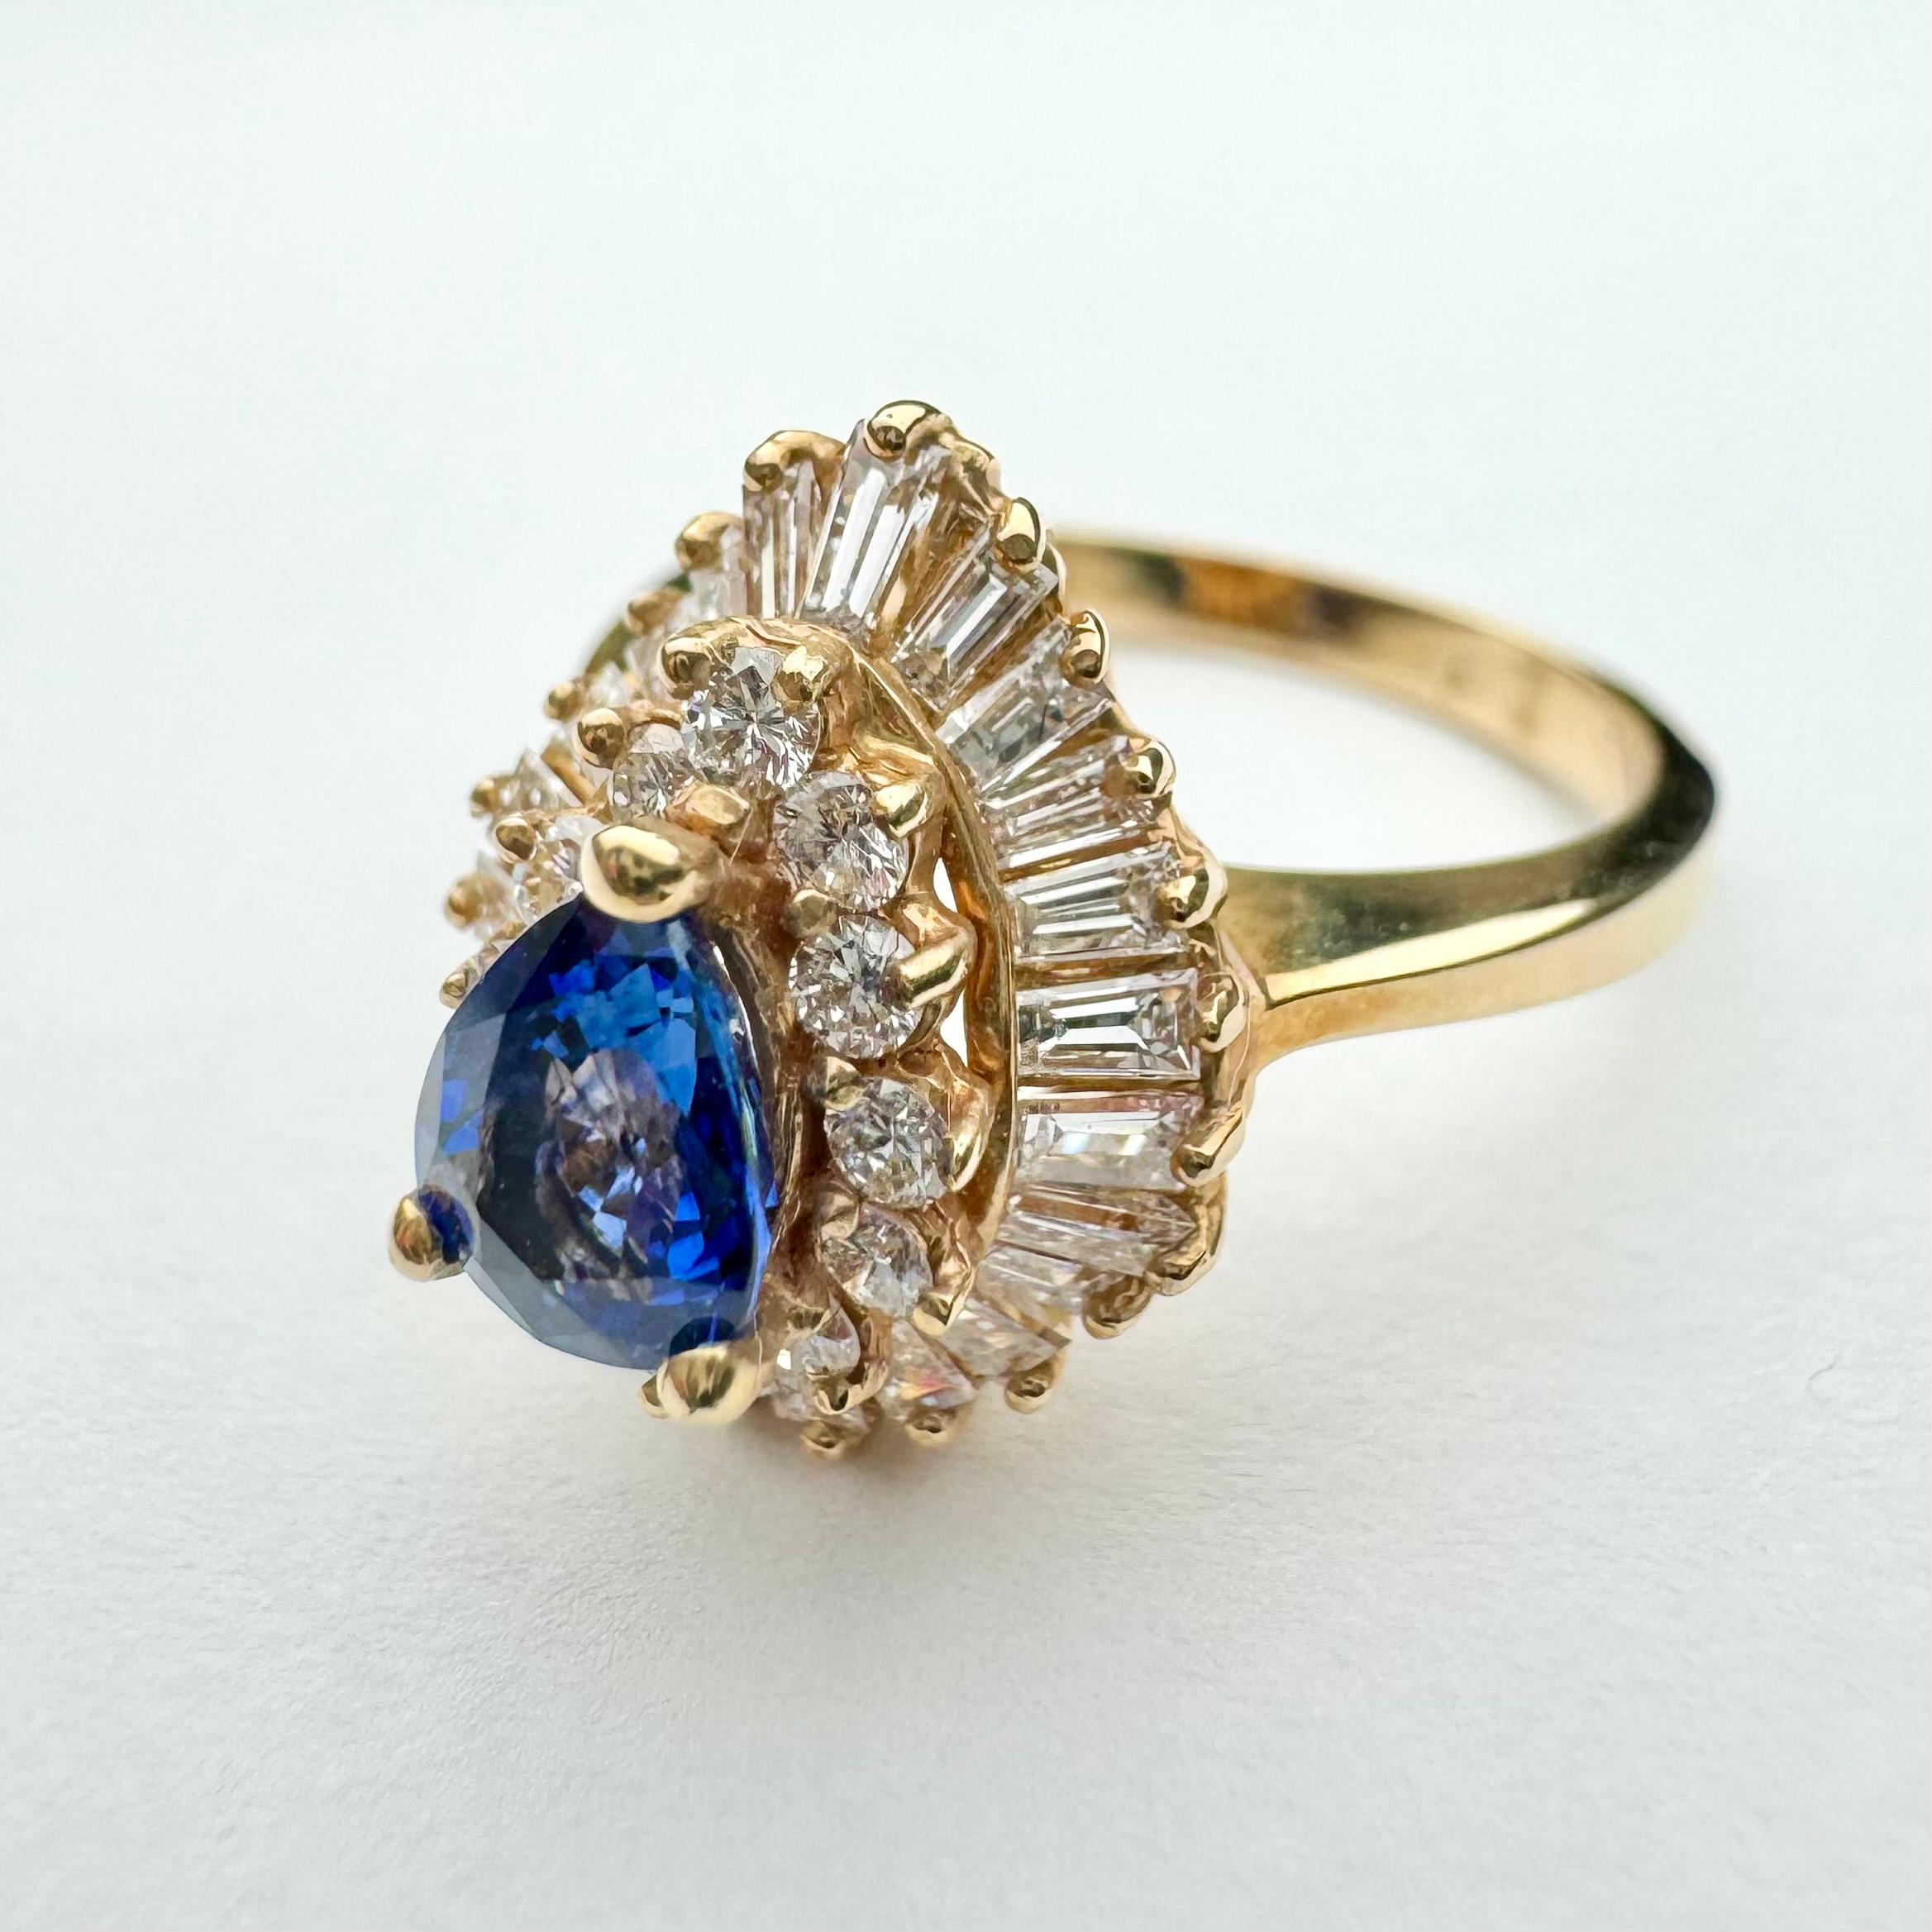 Gorgeous piercing blue, pear shaped sapphire and diamond ring in 14k yellow gold.
Unique and masterfully set in double halo. Inner halo consists of12 sparkling white round diamond and outer halo is in ballerina style with delicate curves created by